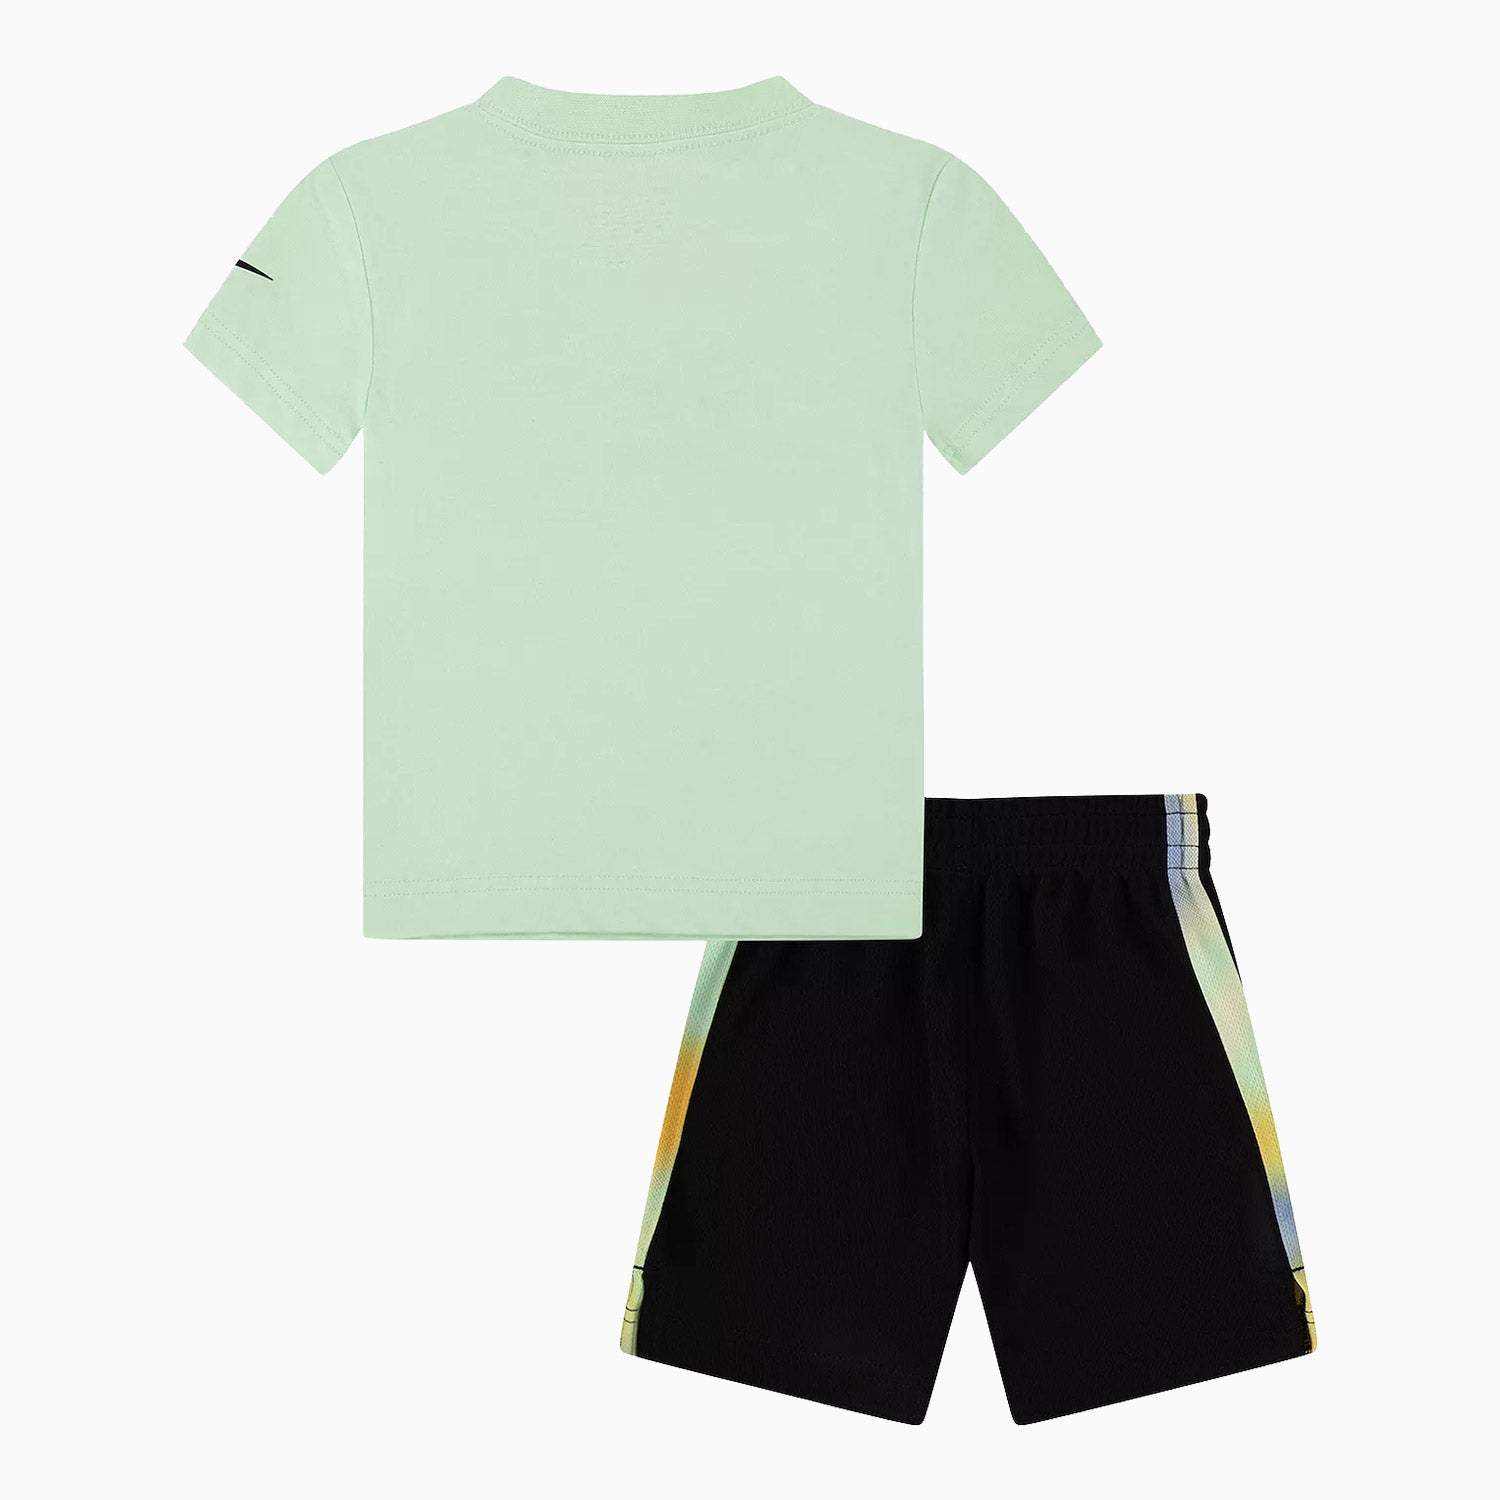 nike-kids-sportswear-graphic-t-shirt-and-mesh-shorts-outfit-66m041-023